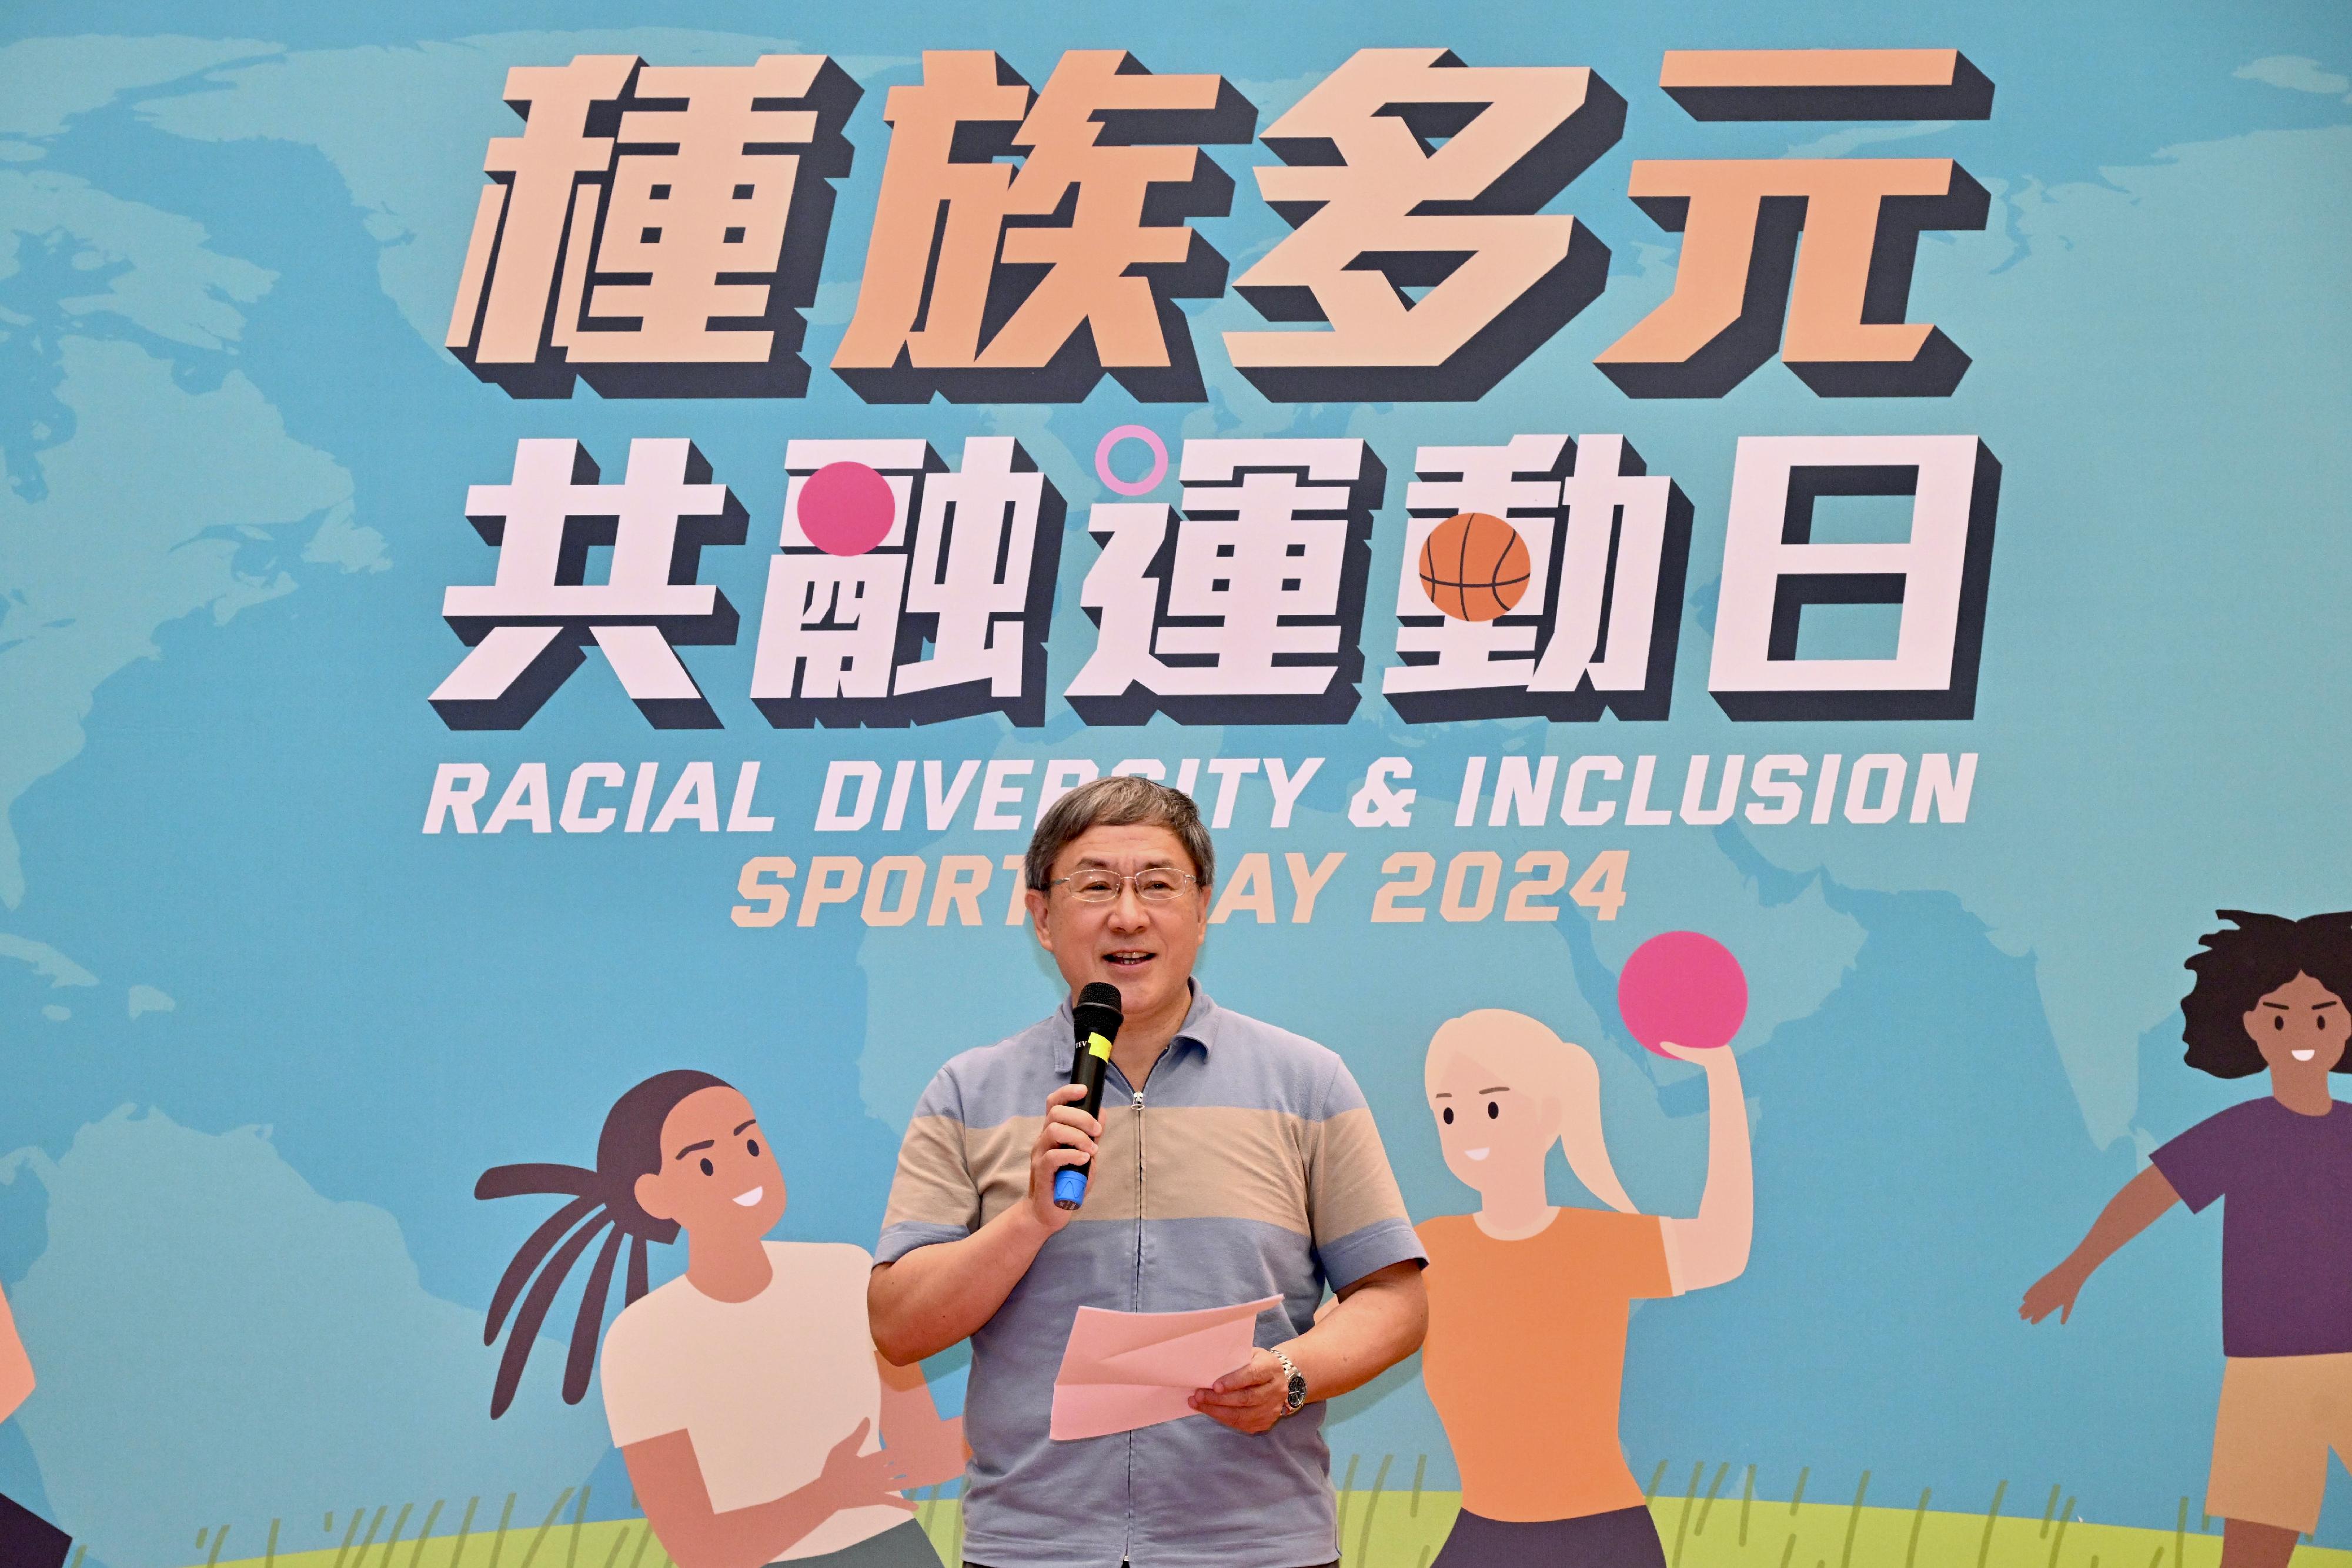 The Deputy Chief Secretary for Administration, Mr Cheuk Wing-hing, speaks at the Opening Ceremony of the Racial Diversity and Inclusion Sports Day 2024 today (April 21).